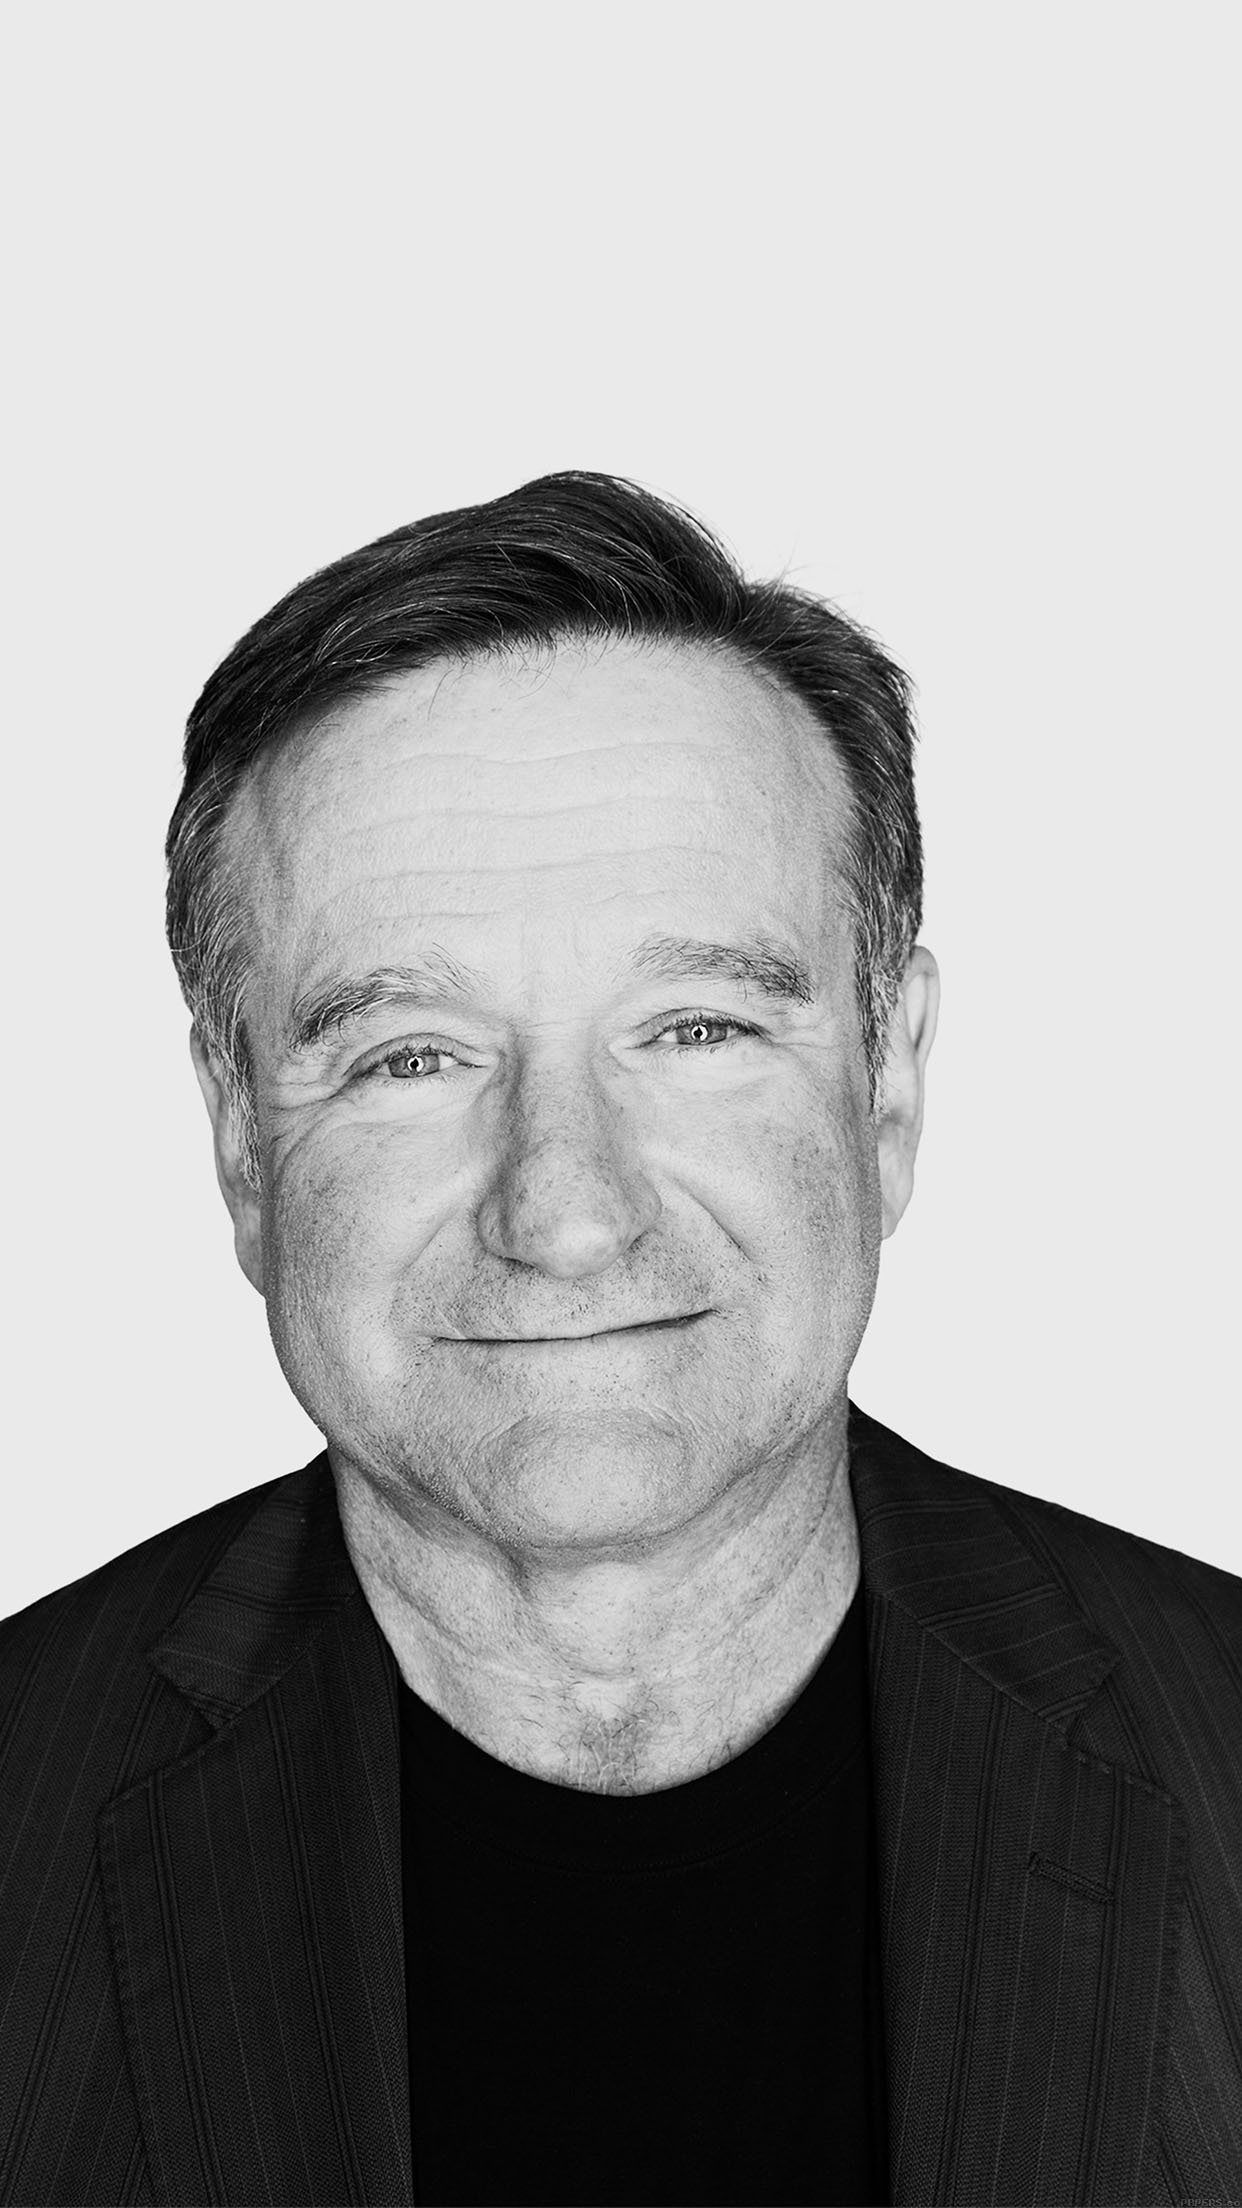 Robin Williams: Starred as Vladimir Ivanov in a 1984 comedy-drama film, Moscow on the Hudson. 1250x2210 HD Wallpaper.